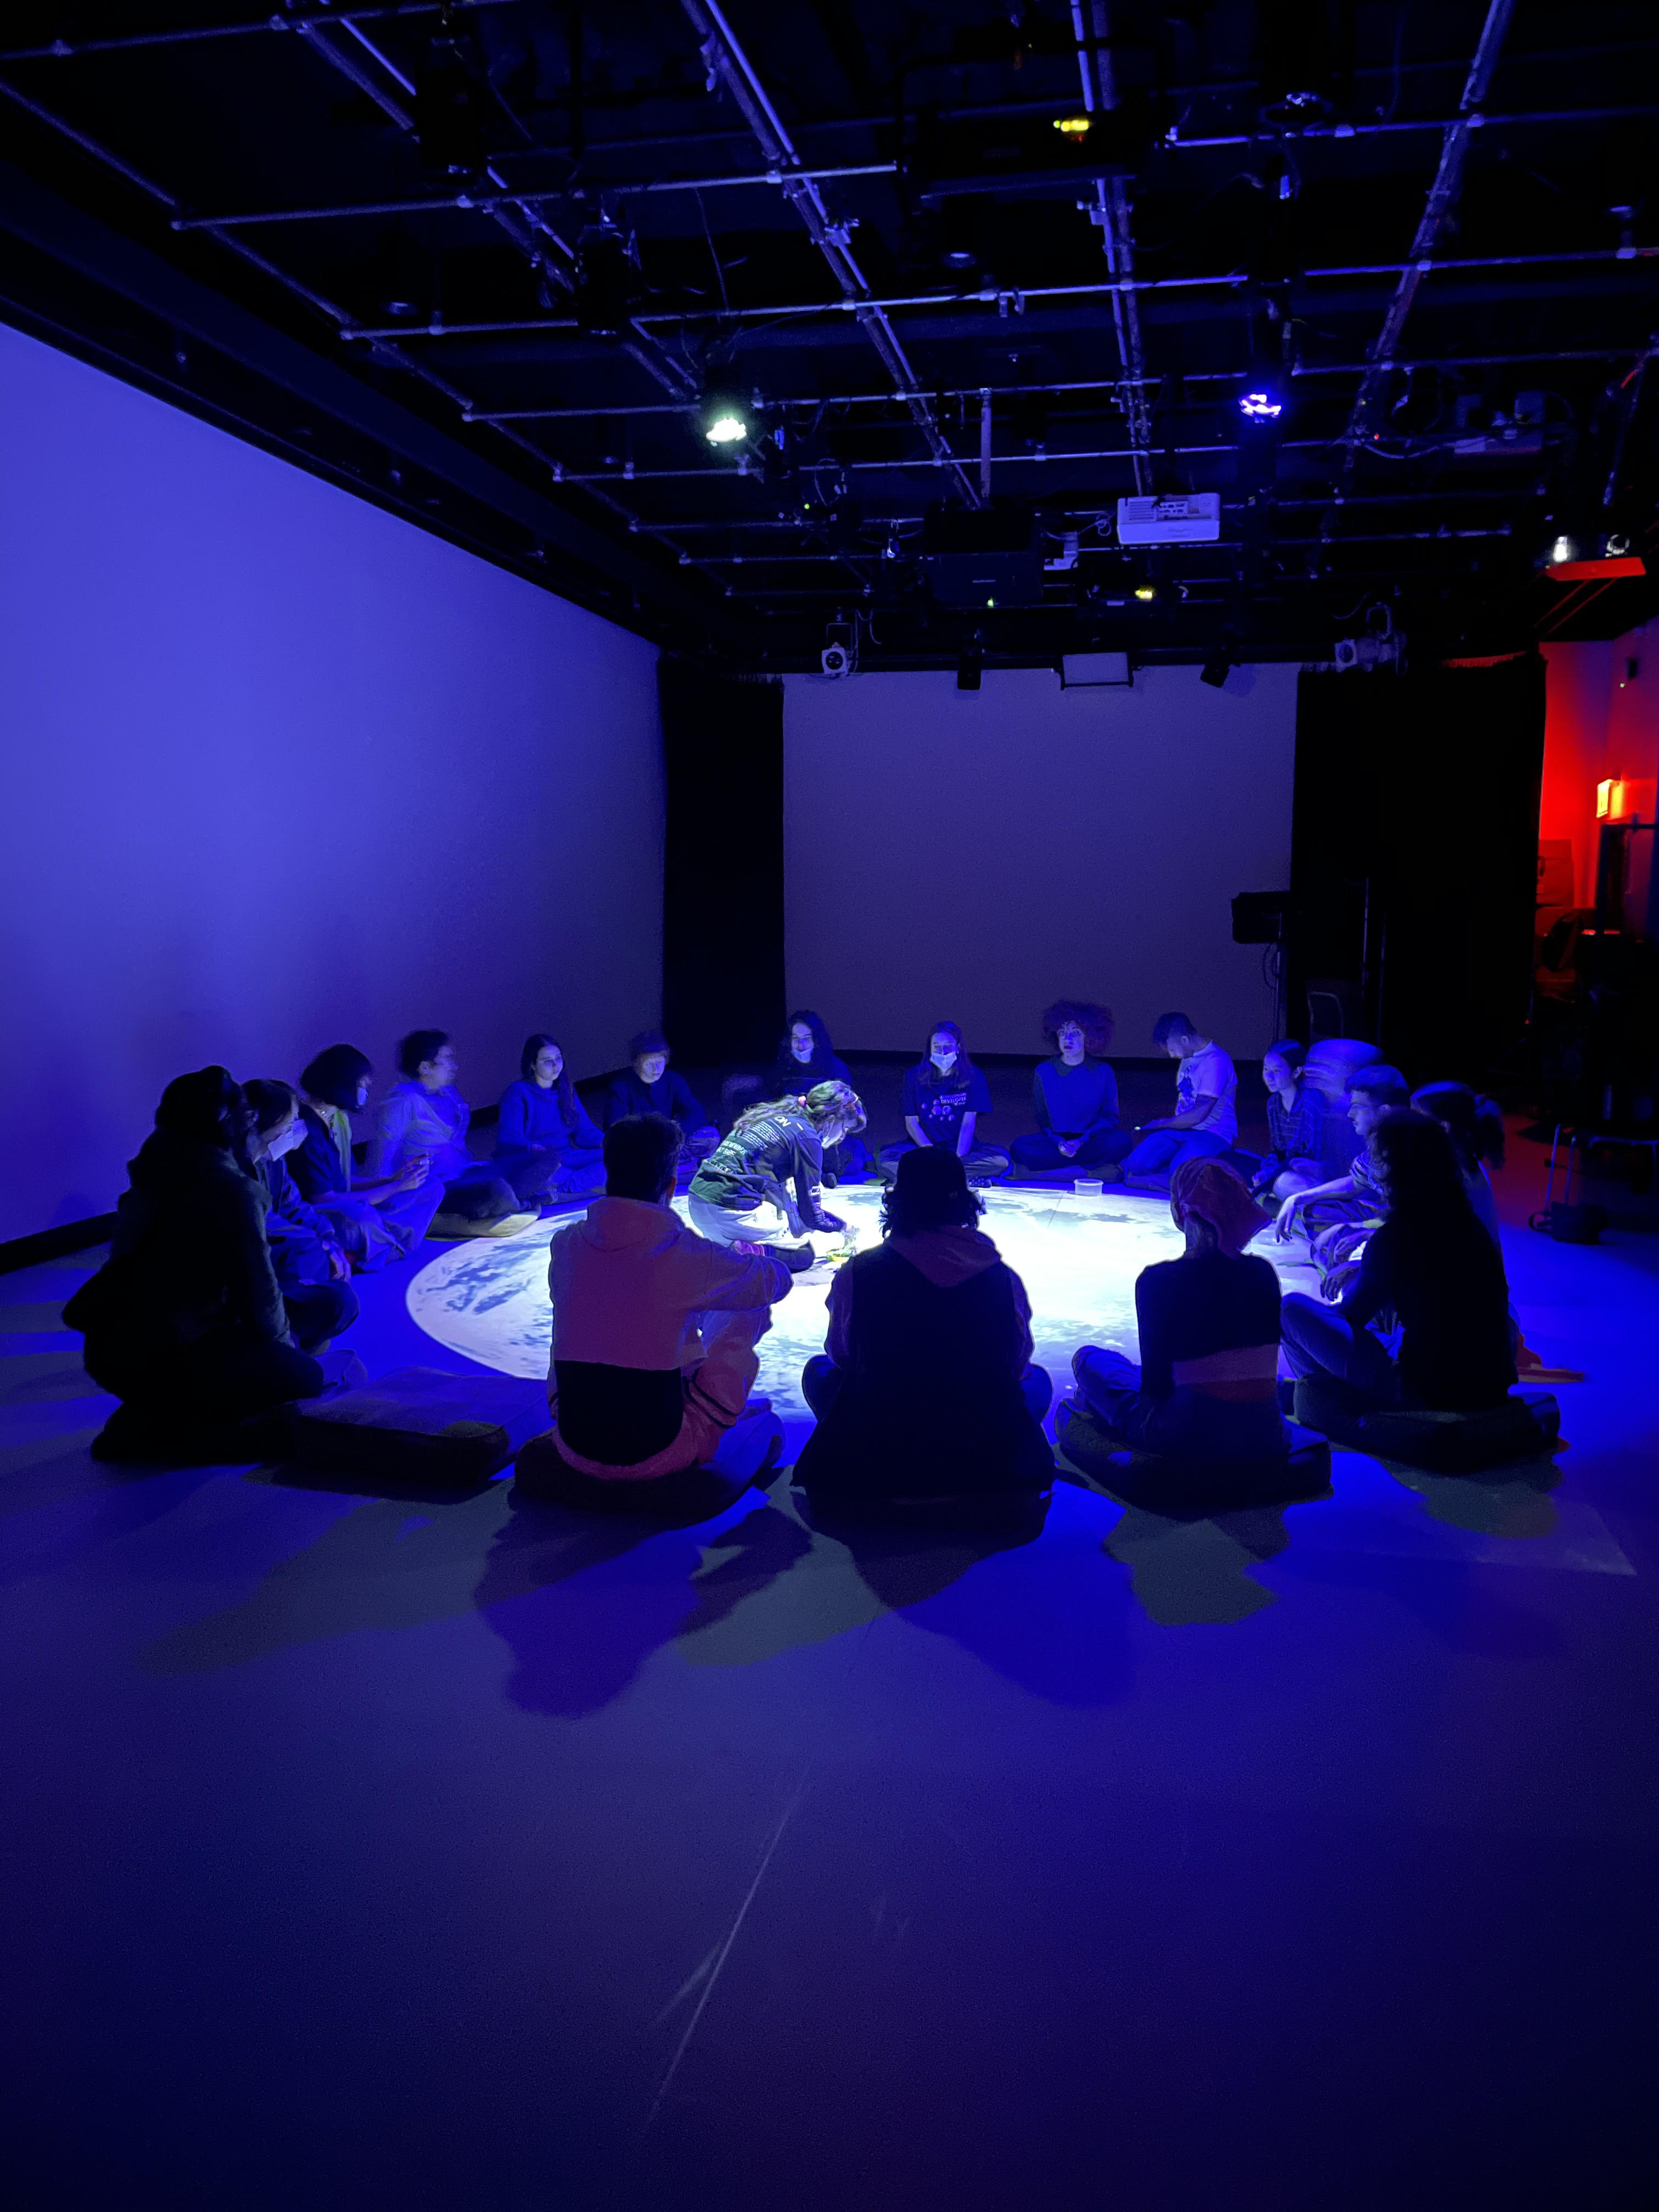 Attention Lab participants sit in a circle on the floor of the Movement Lab. A circular light is projected in the center of the group, where Amalia, the workshop facilitator, leans forward on the floor to demonstrate an exercise.